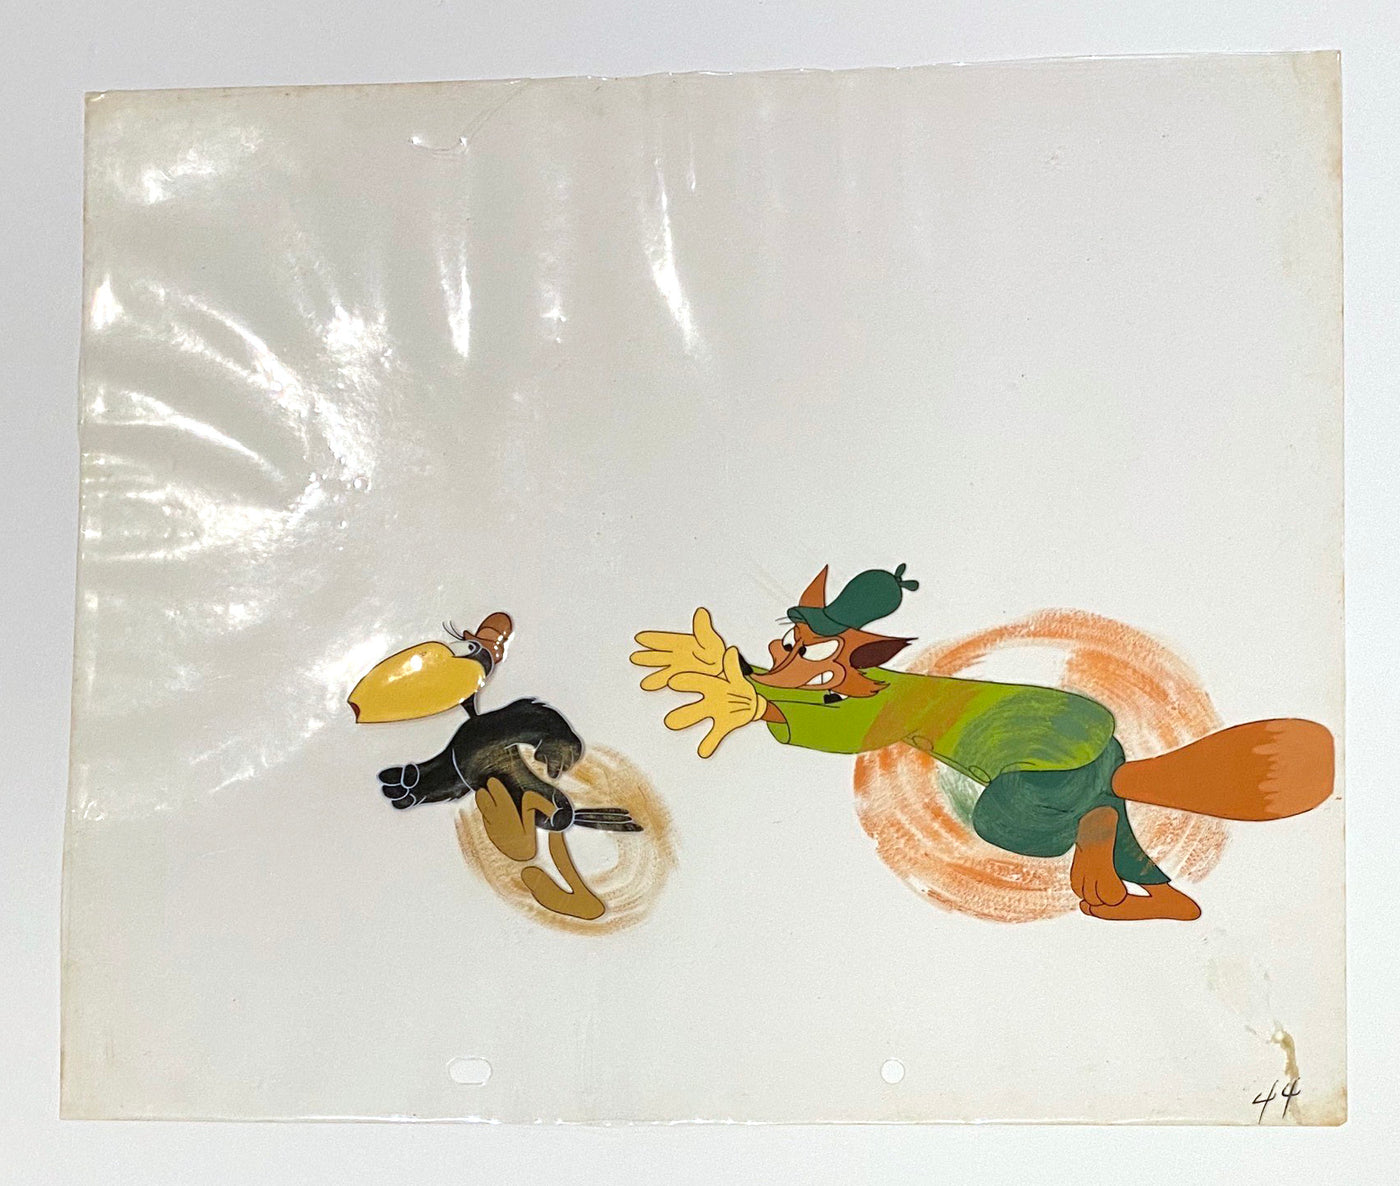 Original Columbia Pictures / Screen Gems Production Cel on Hand Painted Production Background from The Fox and the Crow